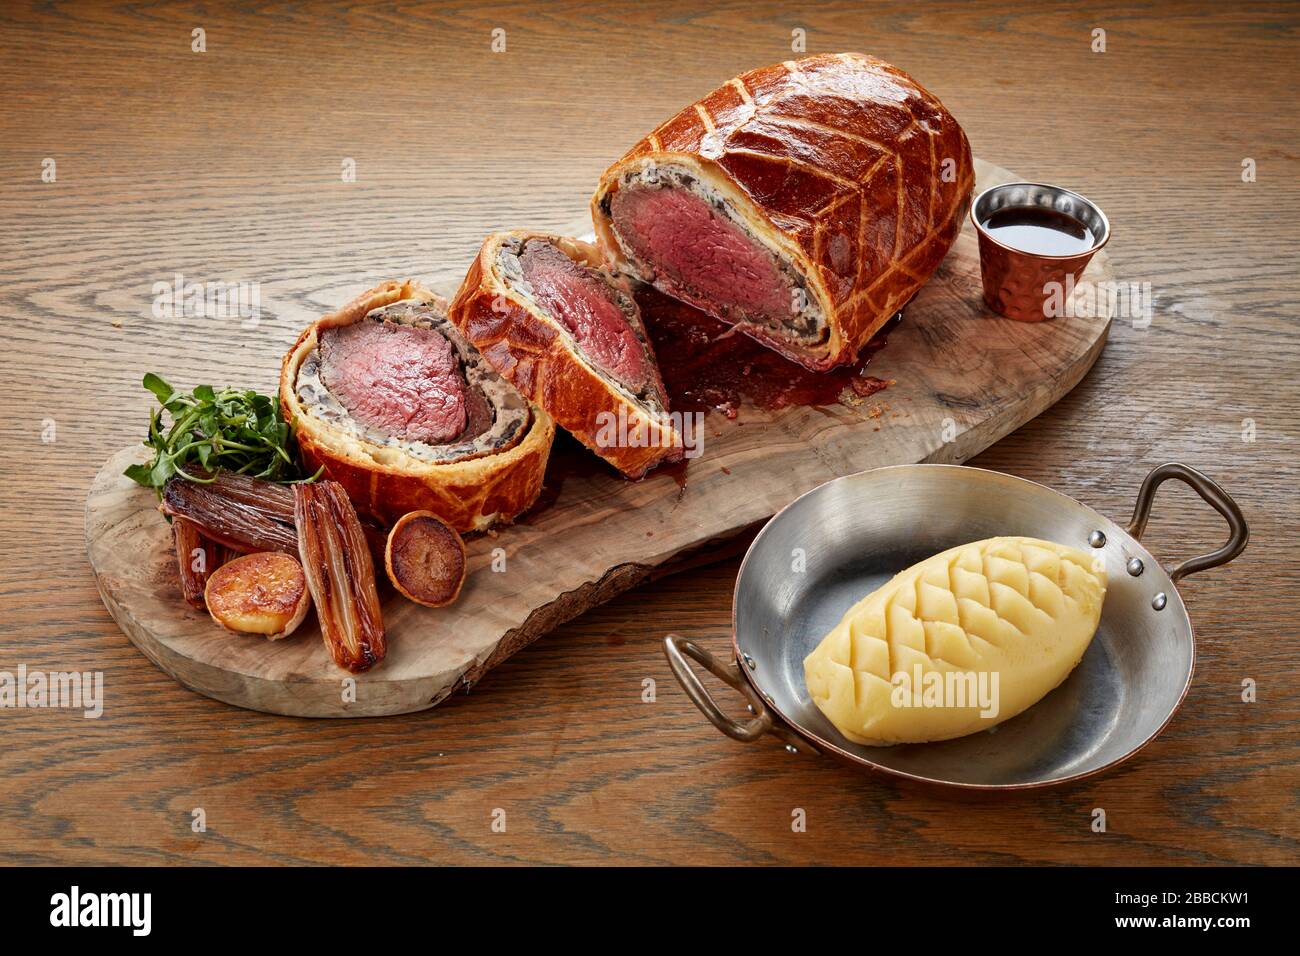 beef wellington whole sliced served board sharing plate platter wood fresh cooked pink perfect pastry meat Stock Photo